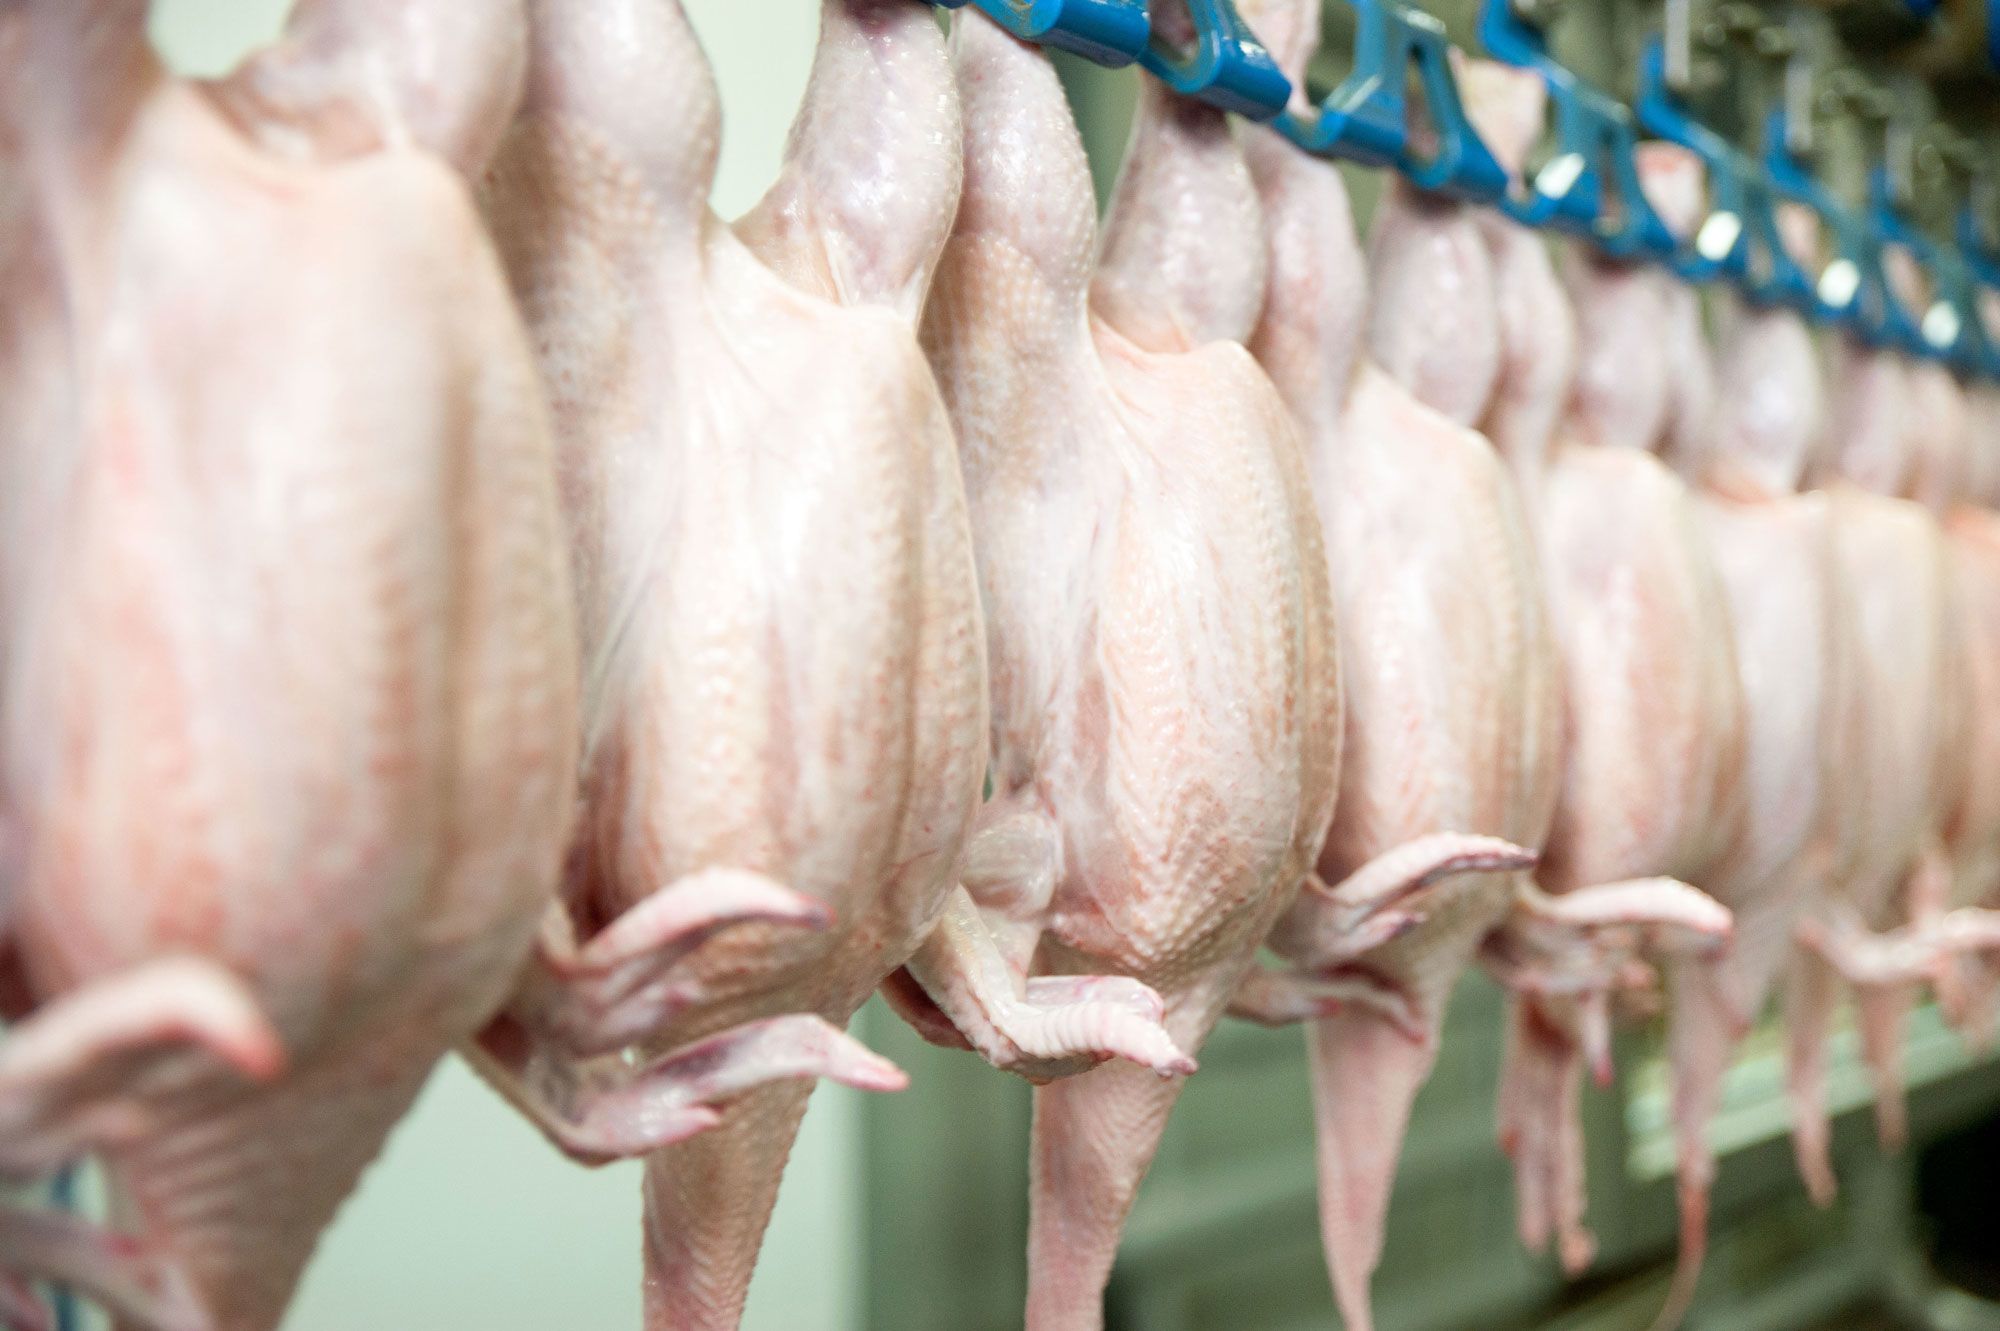 Should You Wash Chicken Before Cooking? The Experts Answer